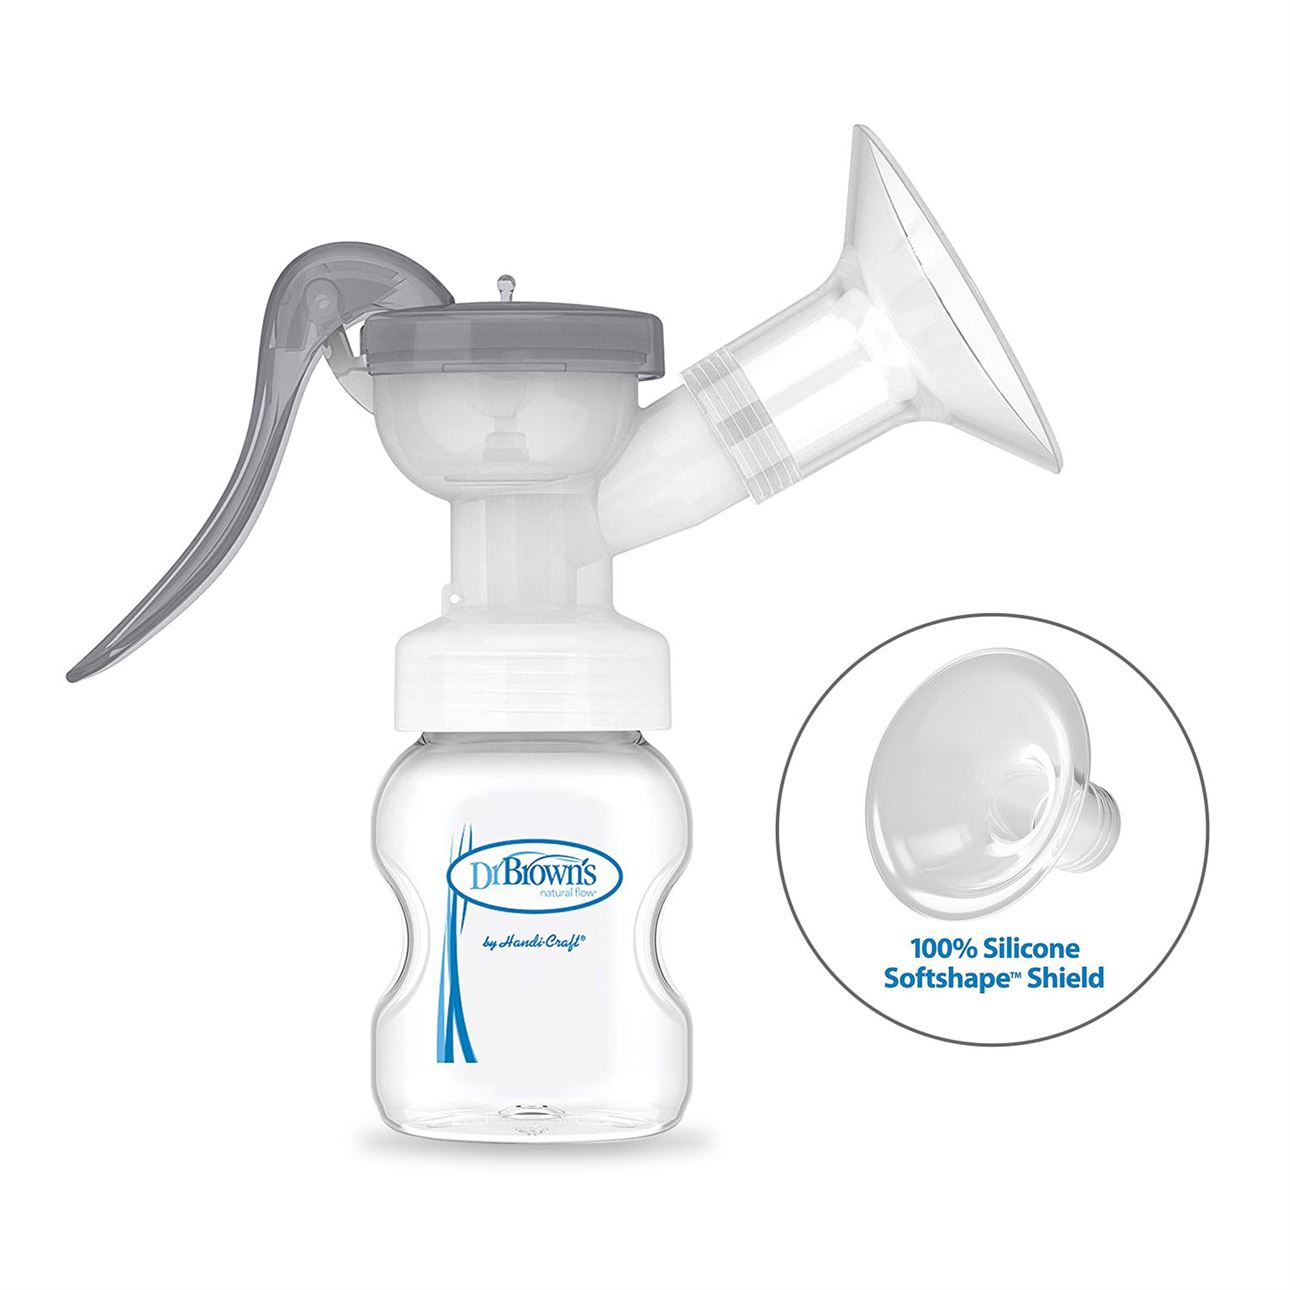 Dr.Browns Natural Flow Manual Breast Pump with Soft Shape Silicon Shield